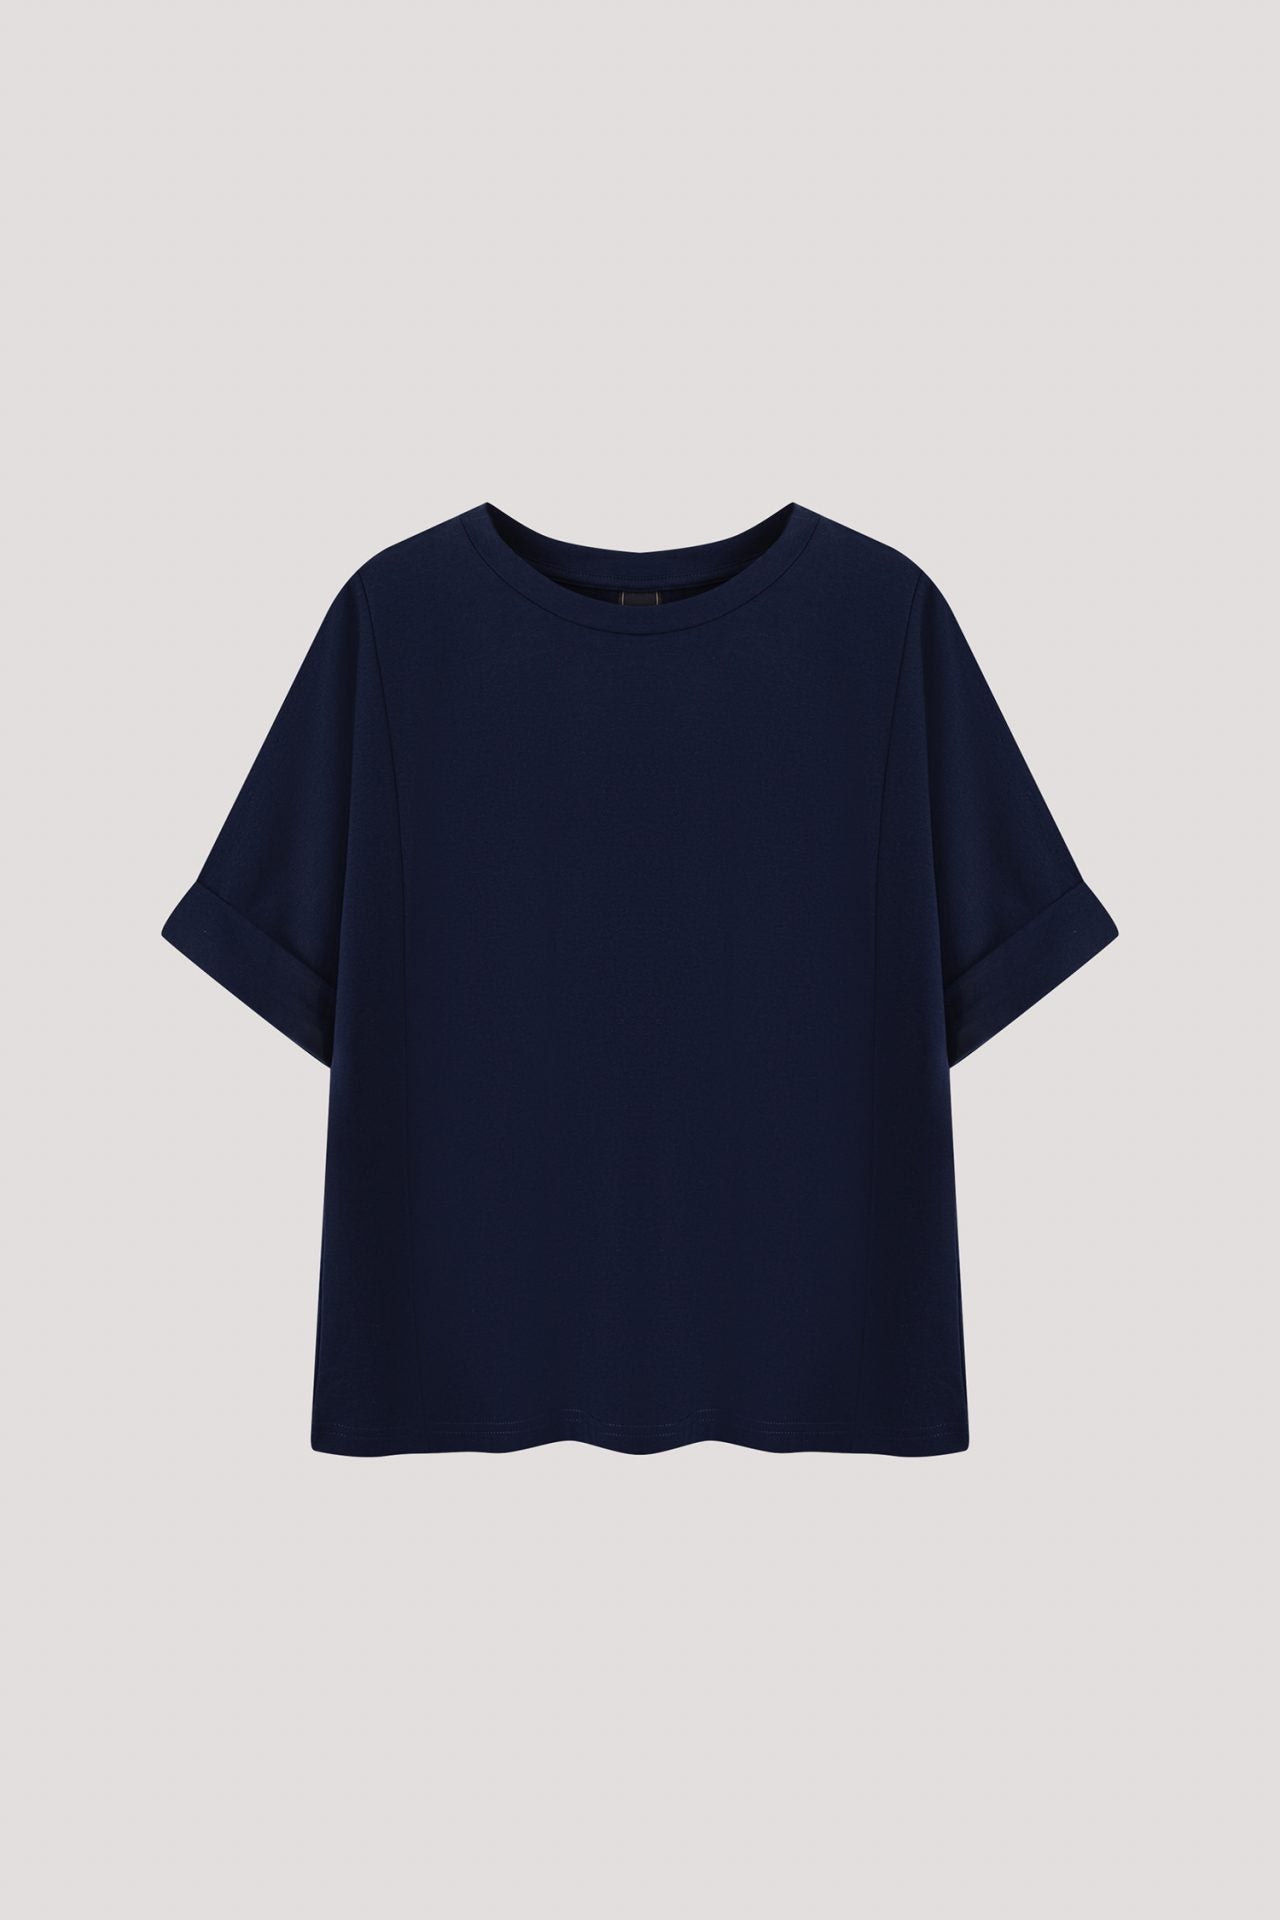 AT 9785 CONTRAST FABRIC BLOUSE NAVY